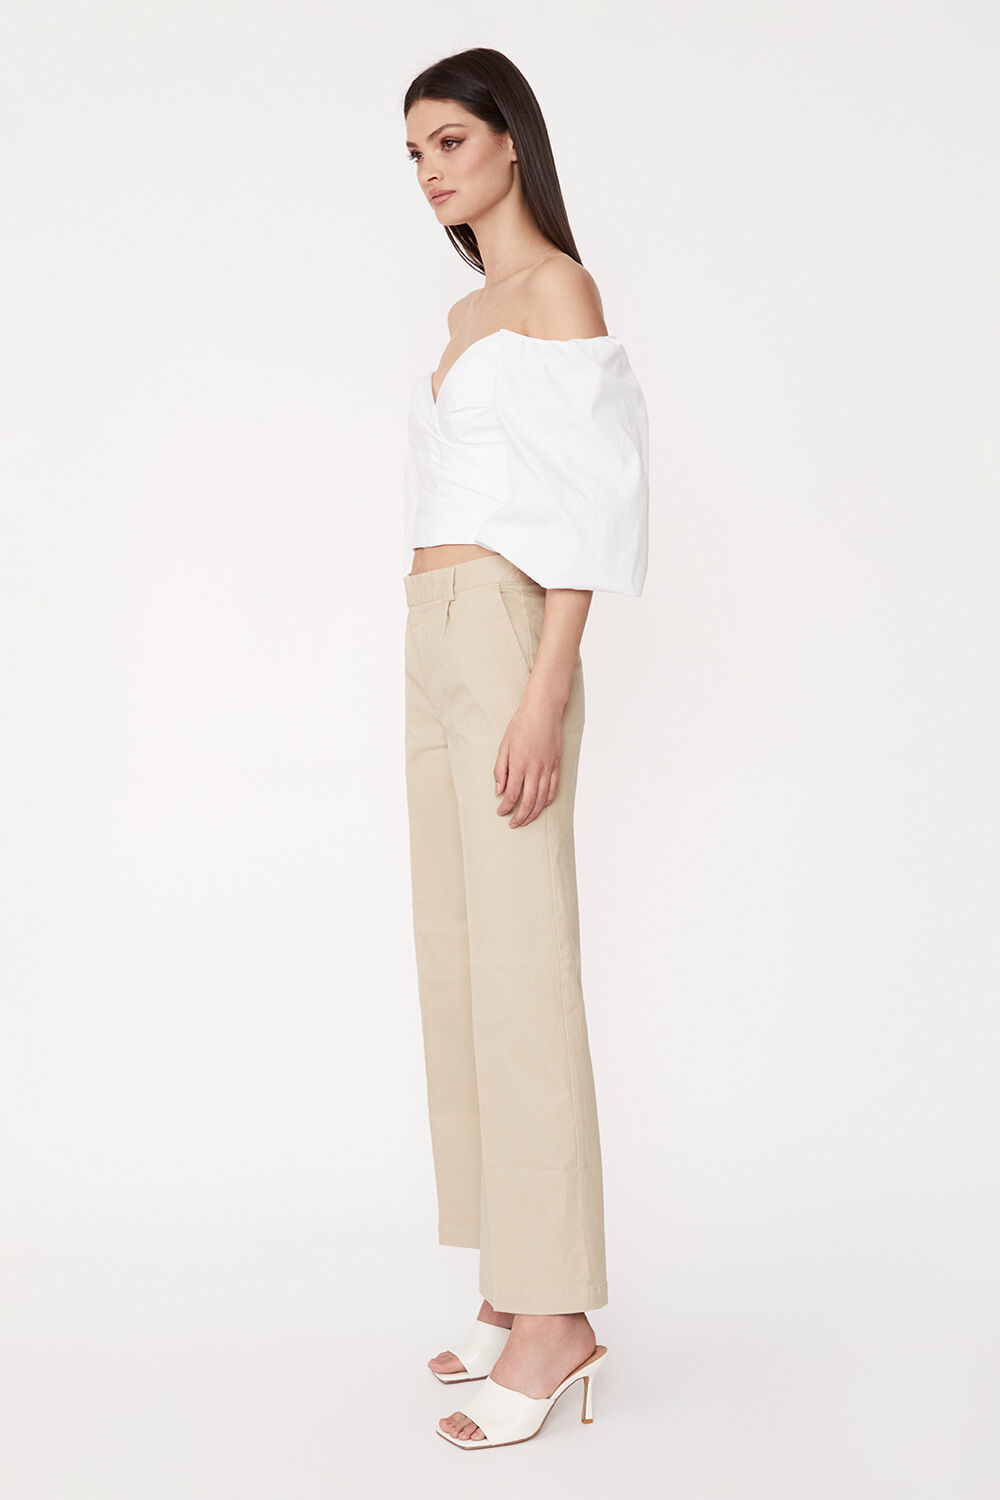 LOW RISE HIPSTER PANT in colour PINK TINT